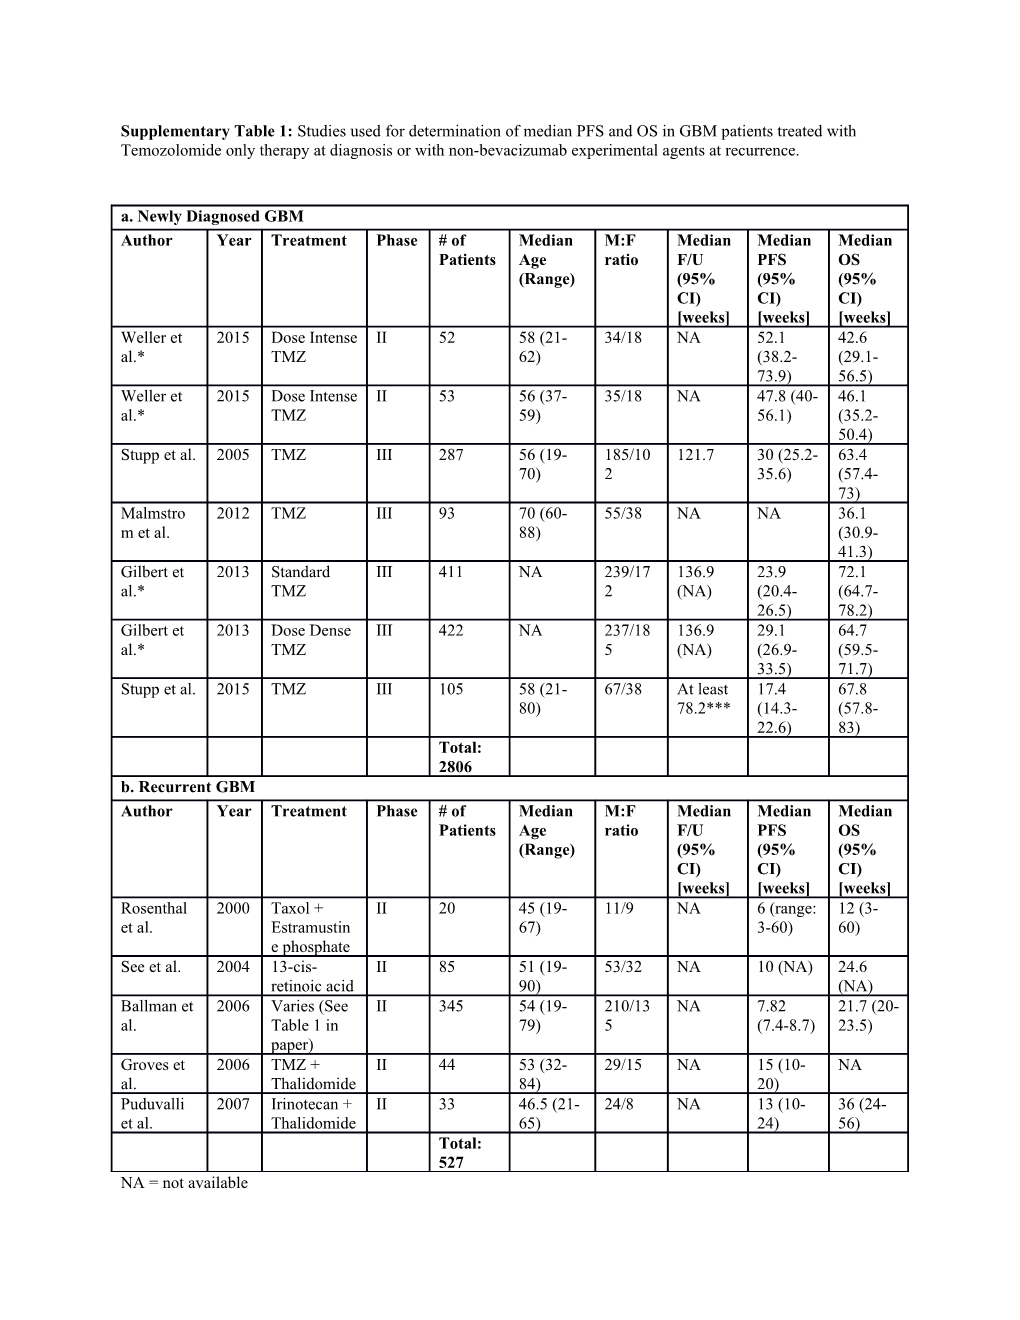 Supplementary Table 1: Studies Used for Determination of Median PFS and OS in GBM Patients